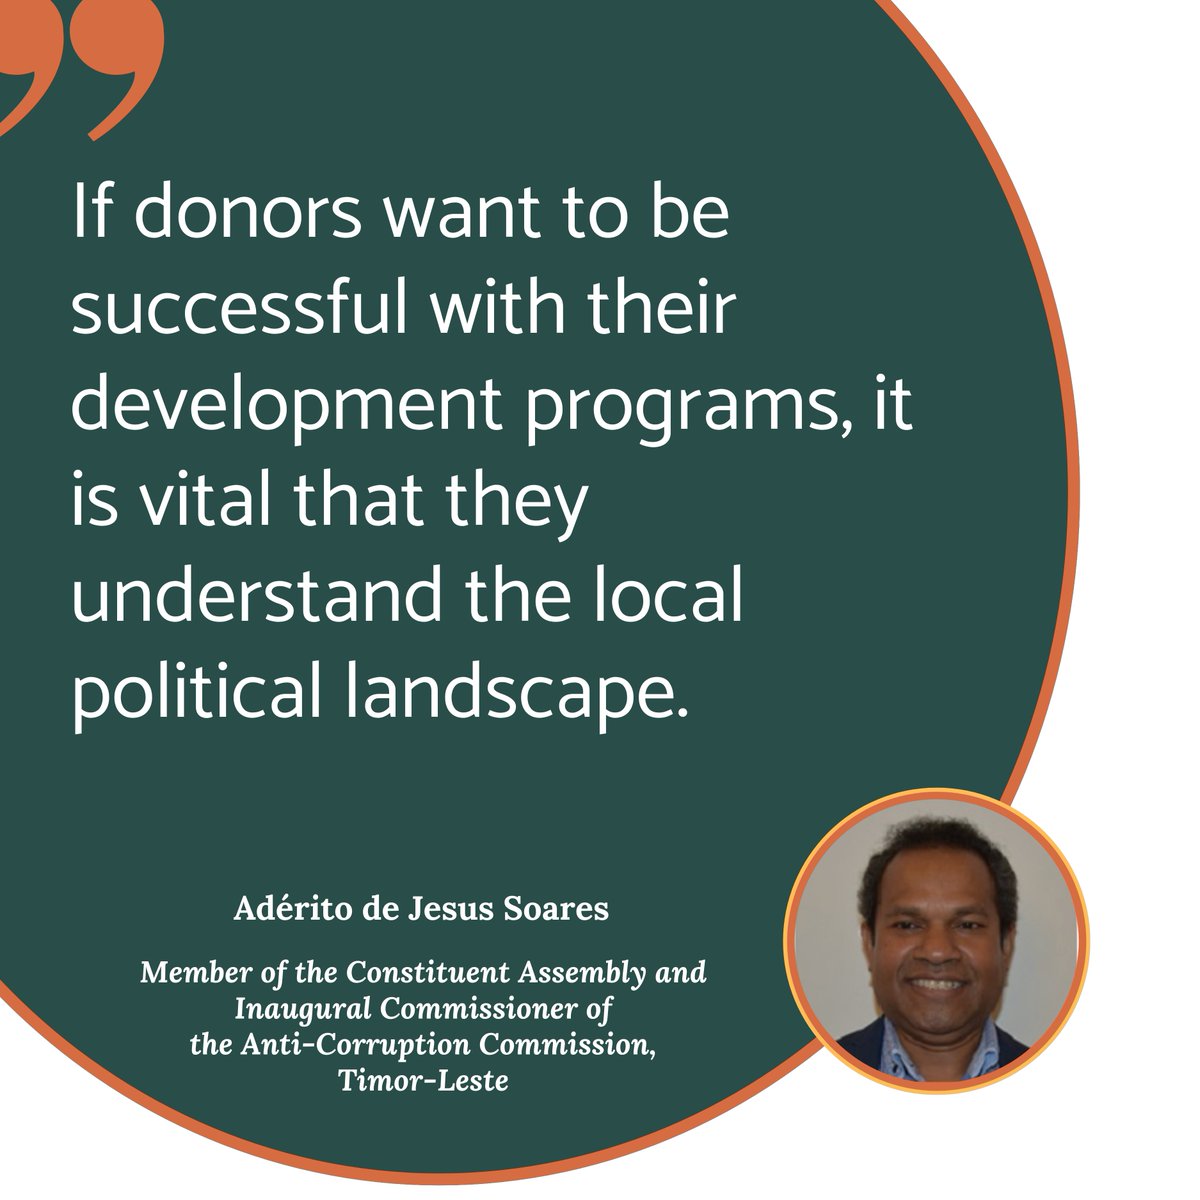 Understanding the local landscape & government intricacies is crucial for effective development practices. Here's a sneak peek at what Adérito de Jesus Soares will discuss at our virtual discussion: Politics, Development, & Change on 4/29. Register here: bit.ly/49W0Swp